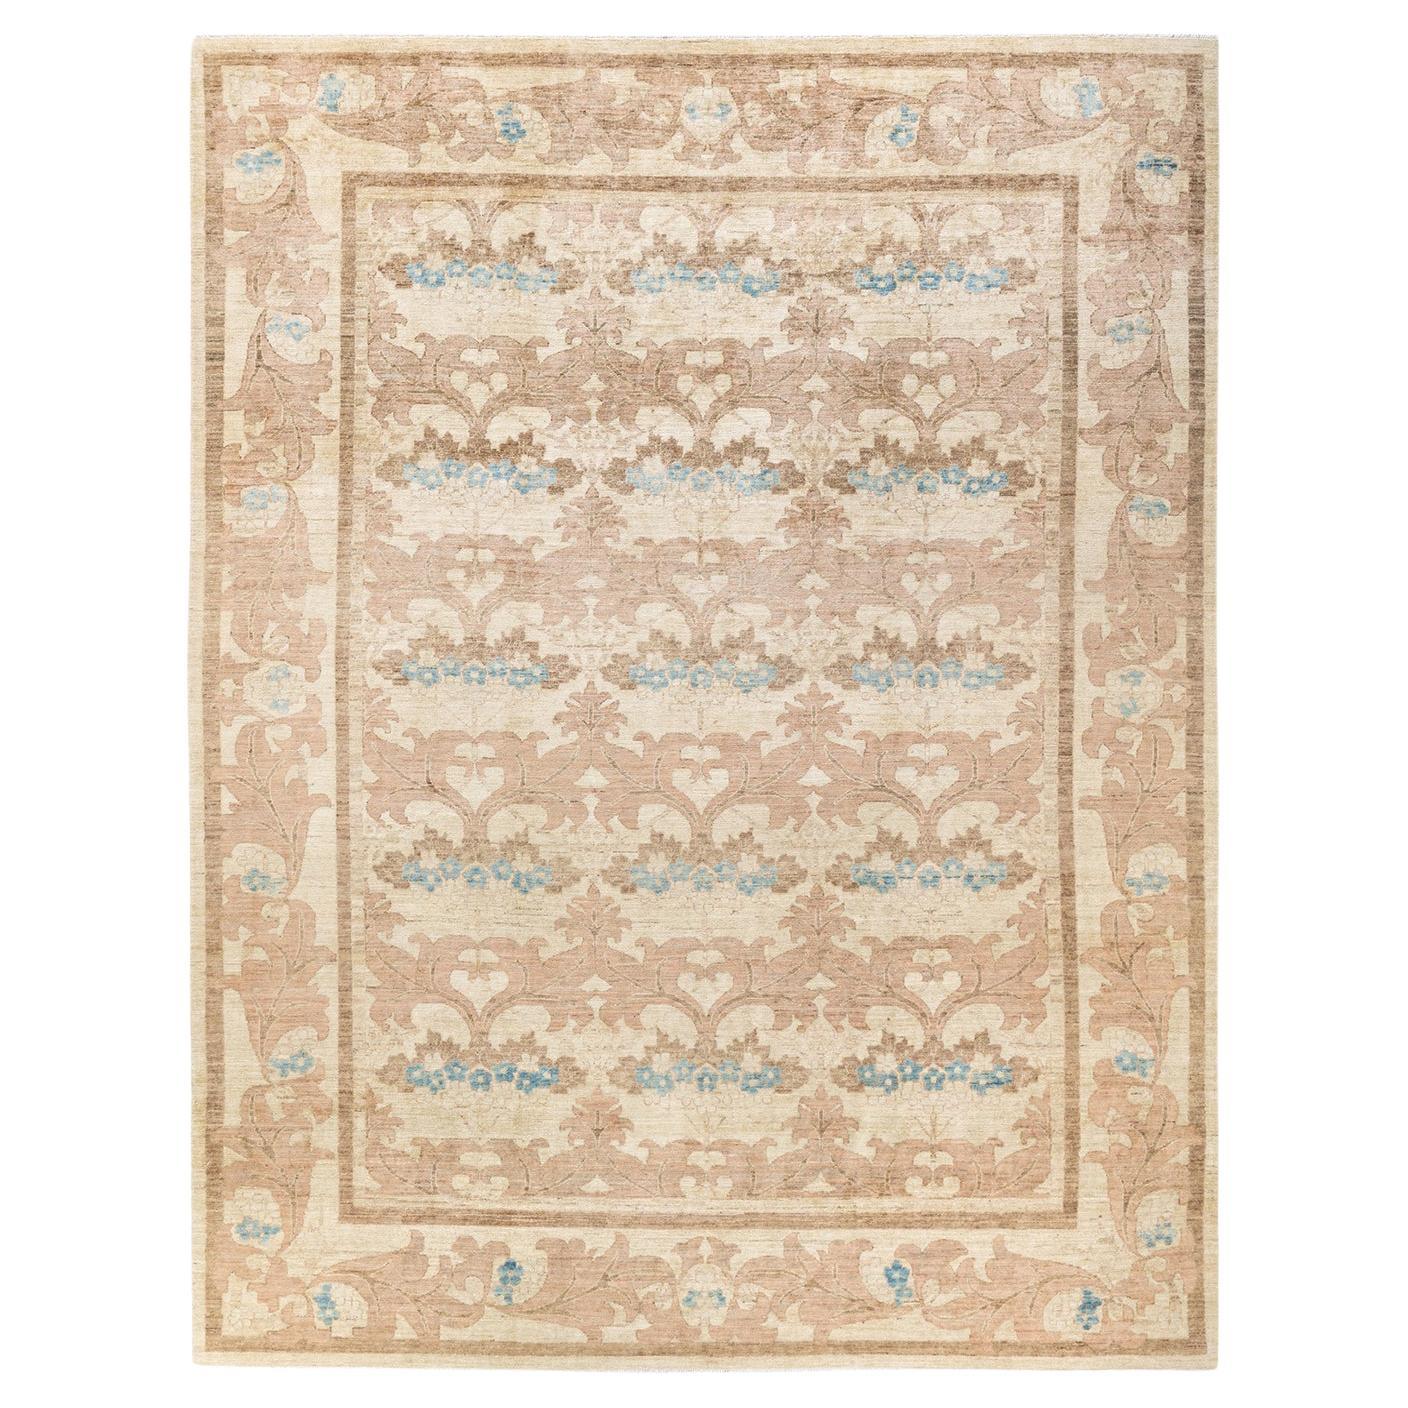 Contemporary Arts & Crafts Hand Knotted Wool Ivory Area Rug